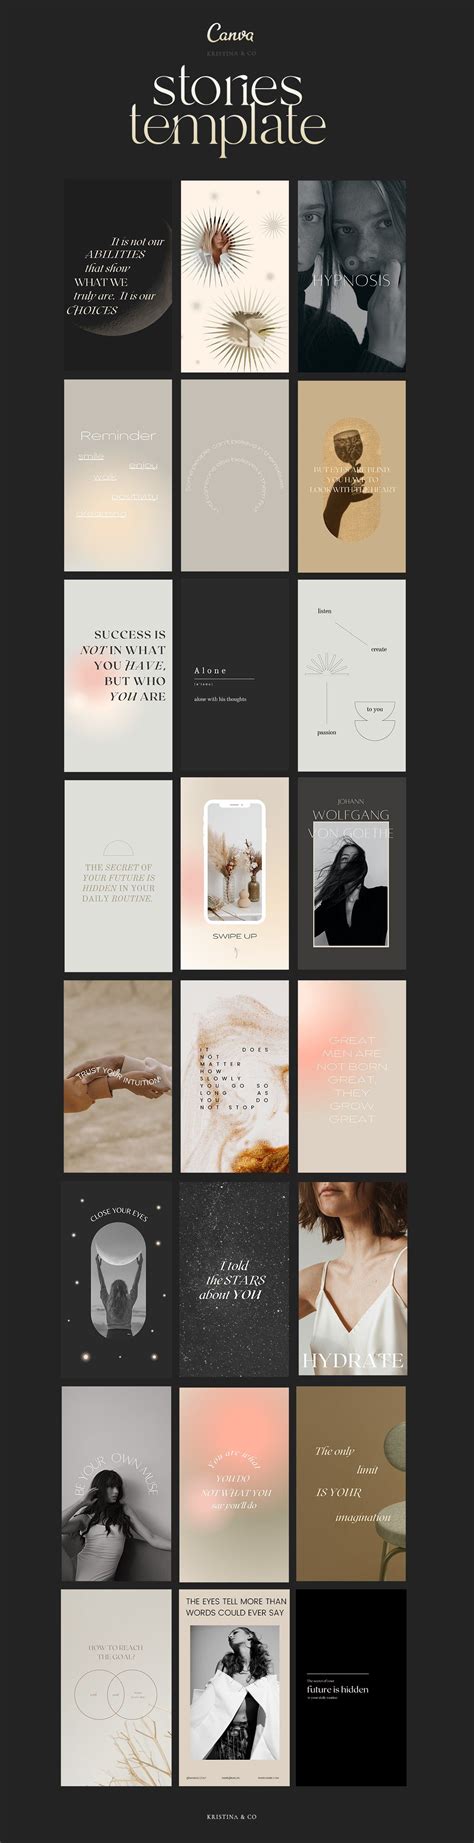 62 Aesthetic Quotes Magic Type By Kristinaandco On Creativemarket Social Media Trends Social